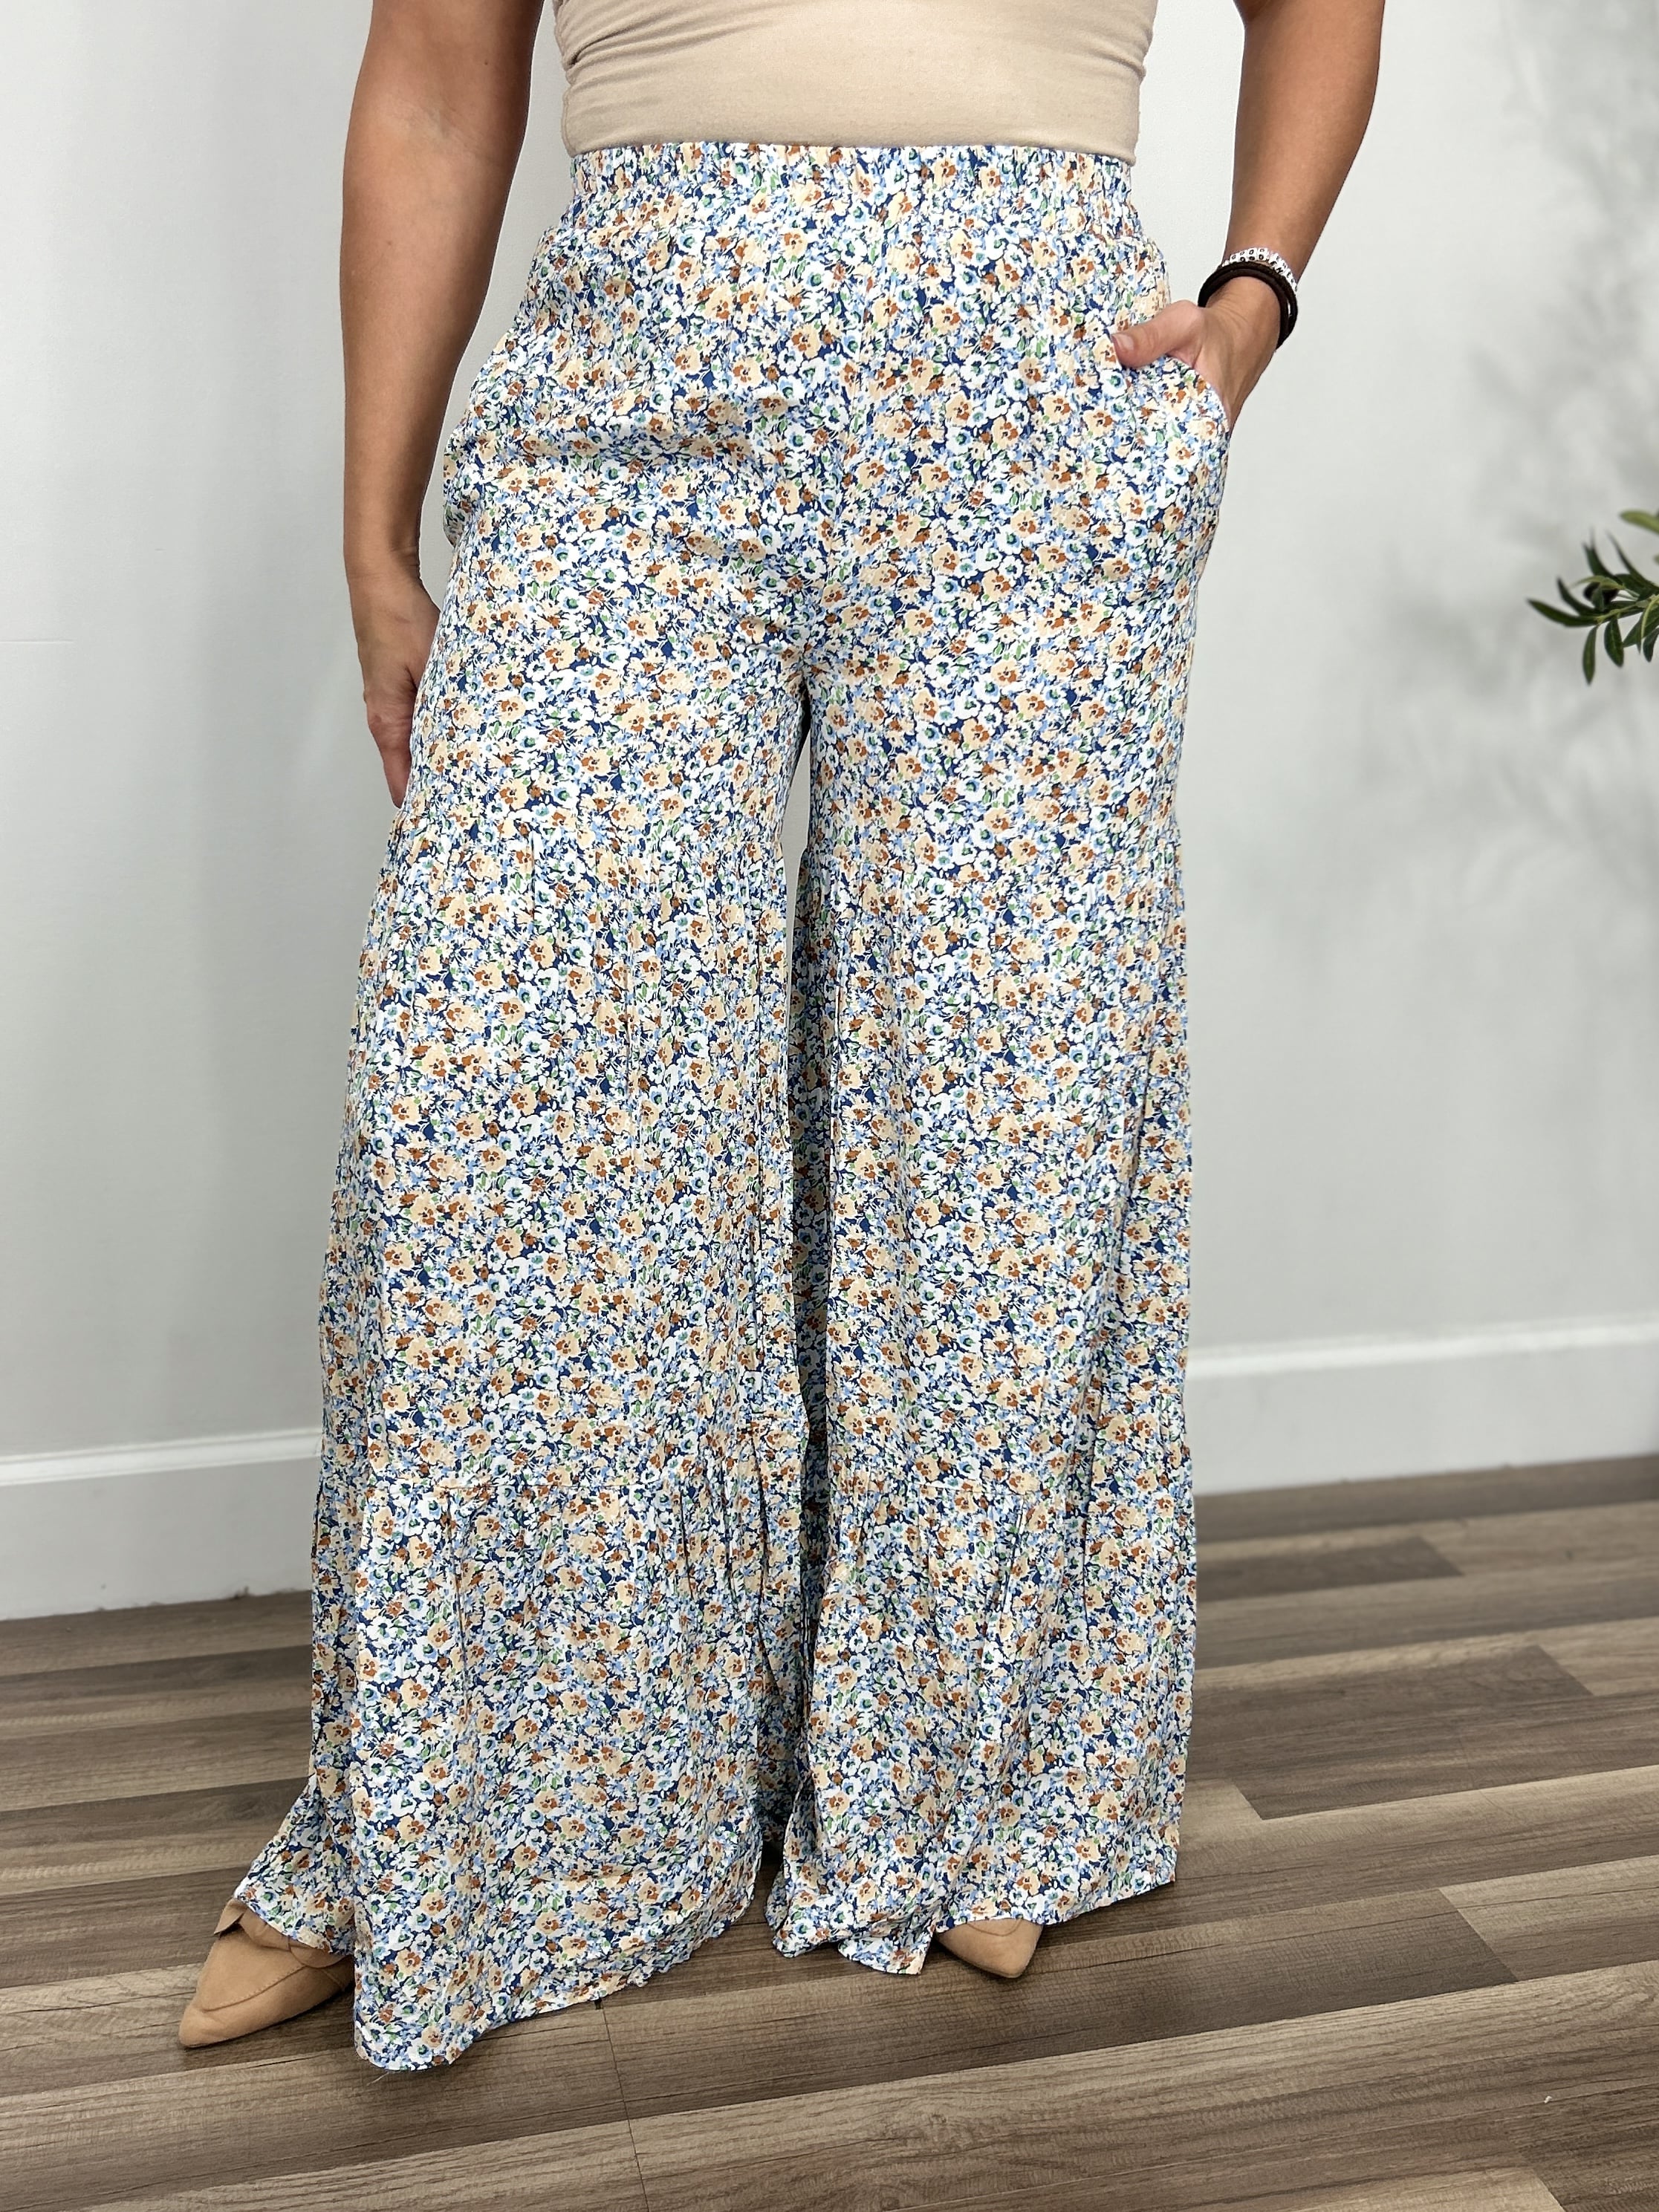 Women's multi color floral pants with flared wide legs and functional side pockets.